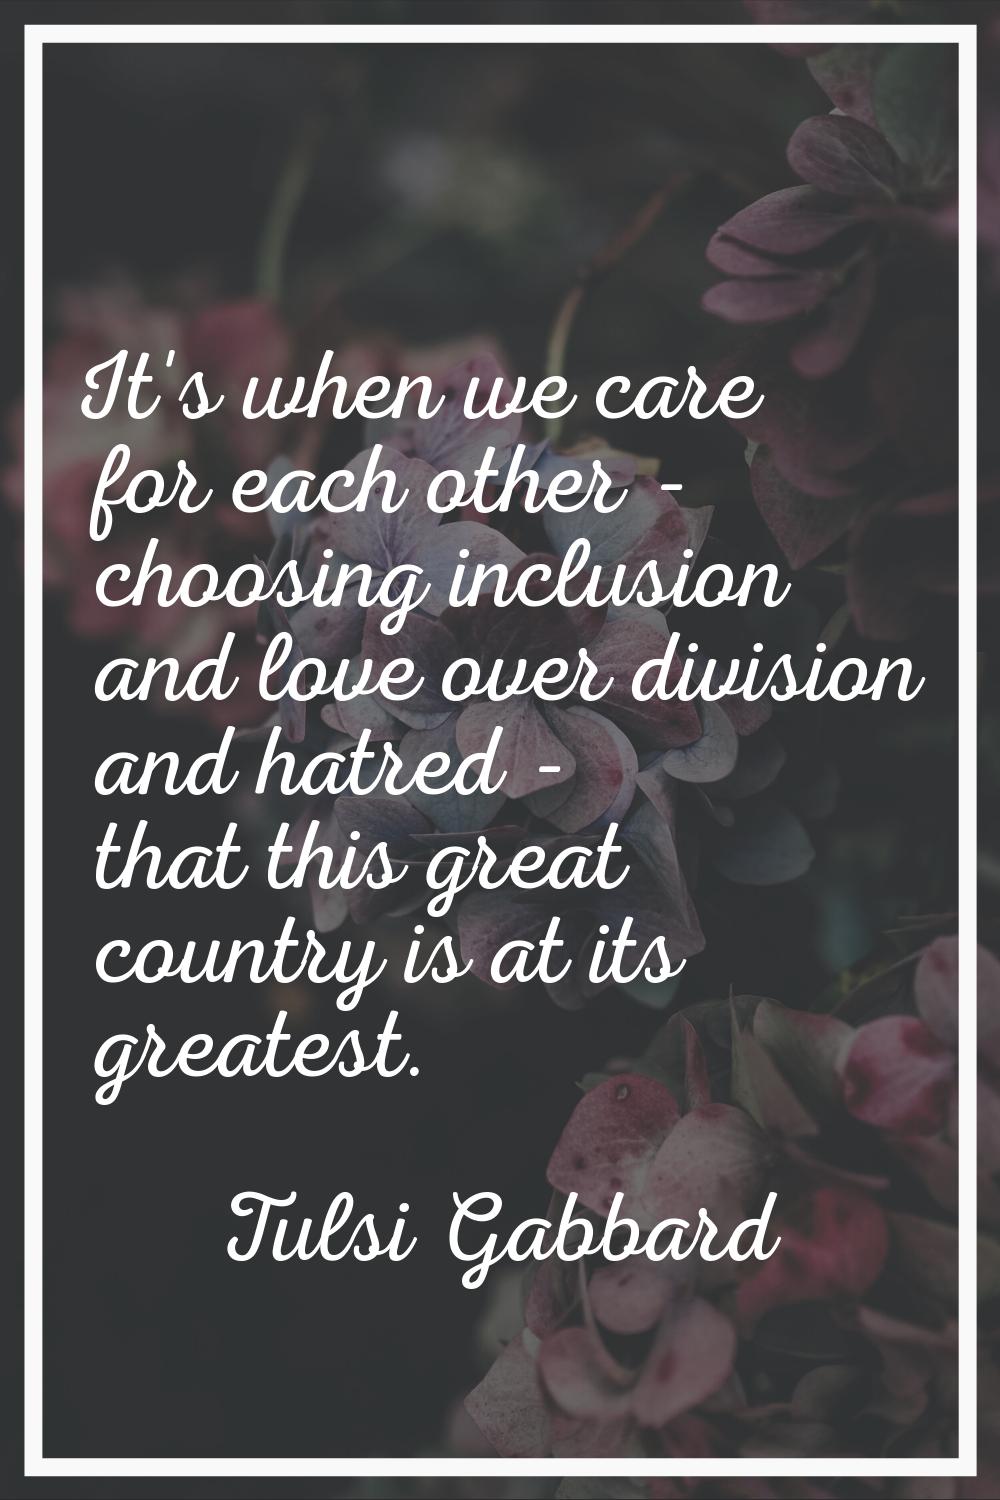 It's when we care for each other - choosing inclusion and love over division and hatred - that this